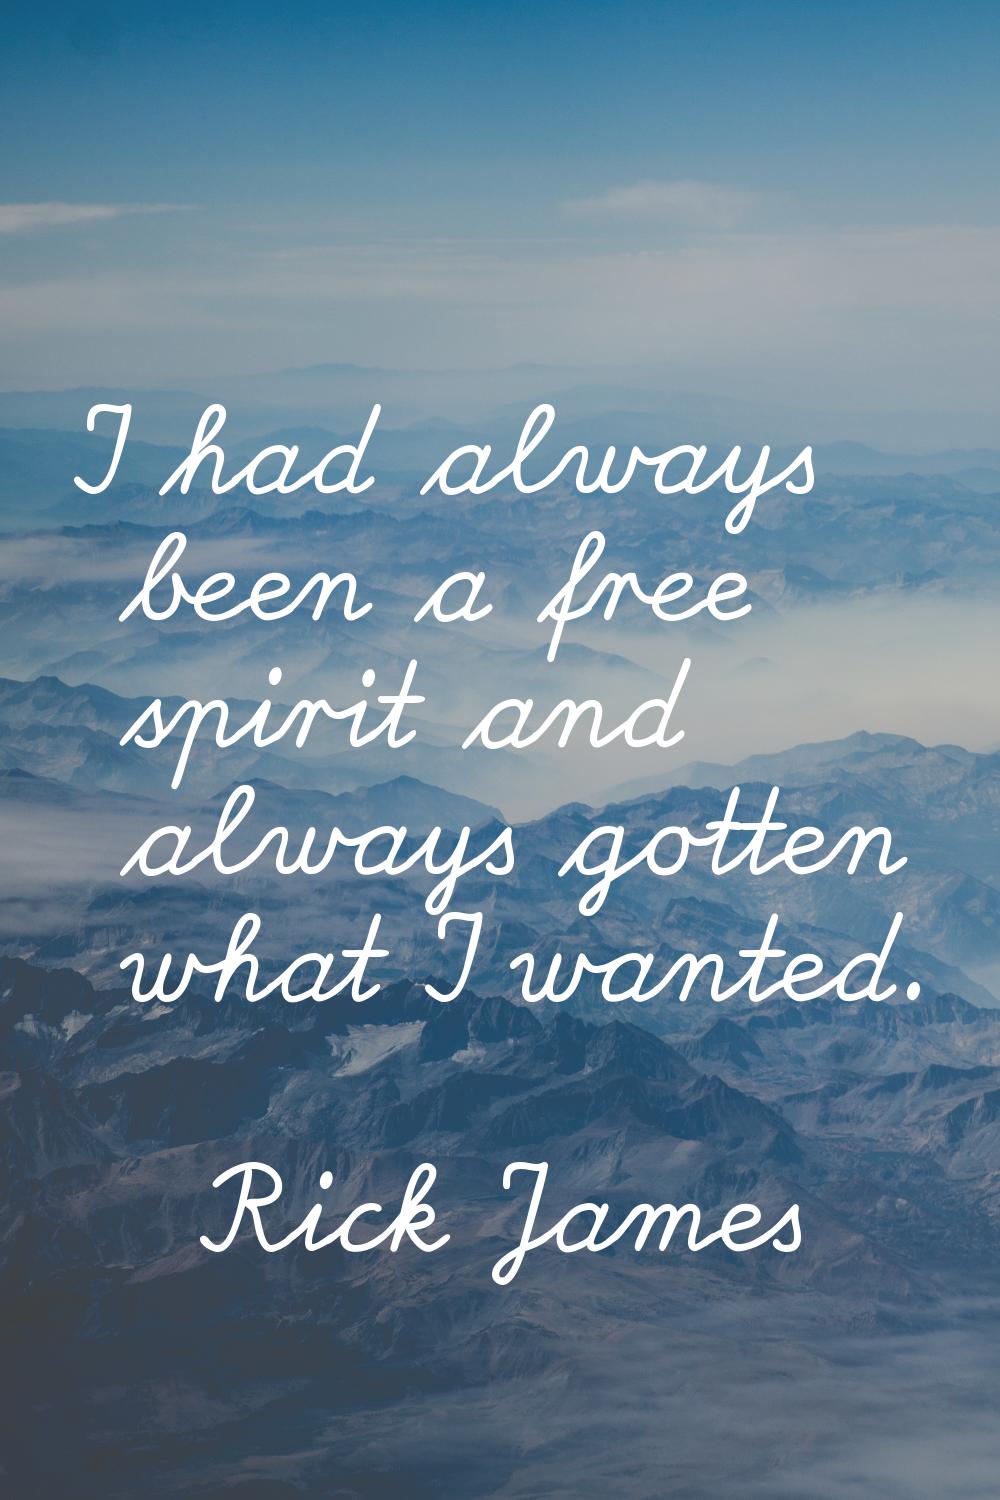 I had always been a free spirit and always gotten what I wanted.